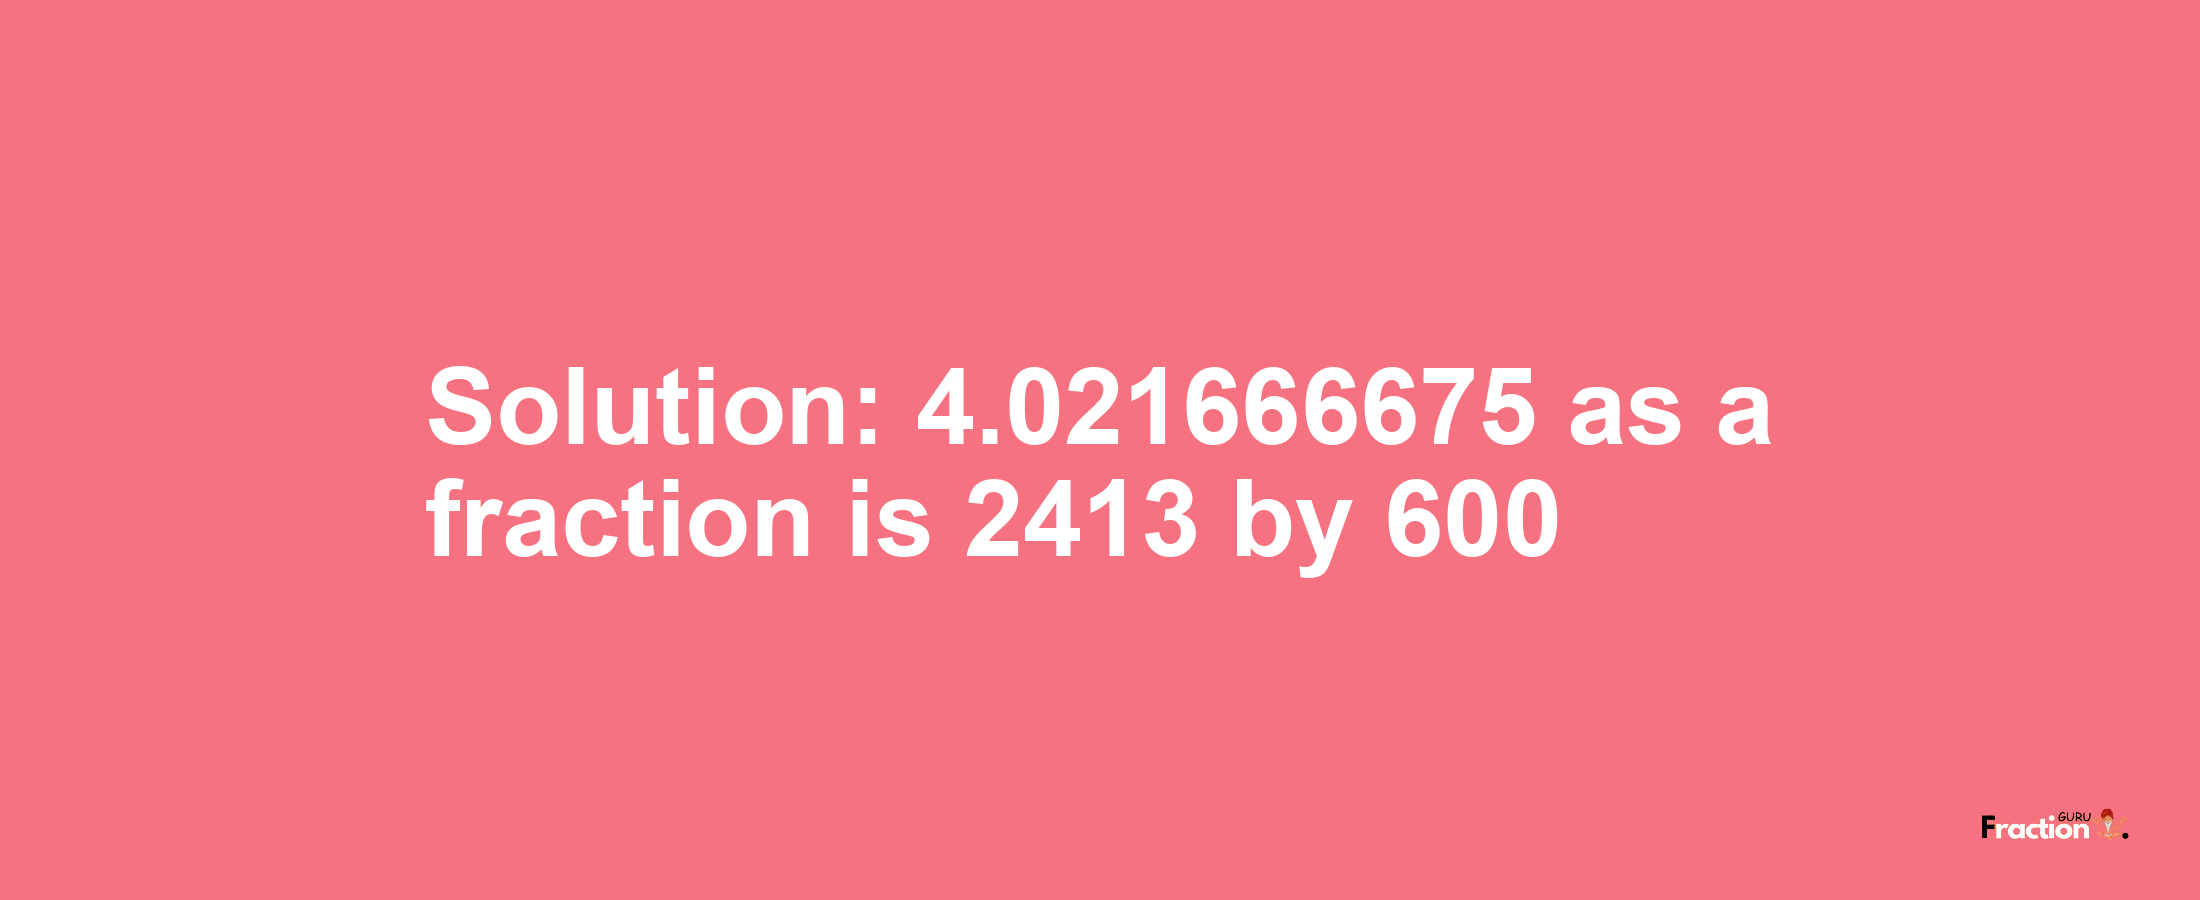 Solution:4.021666675 as a fraction is 2413/600